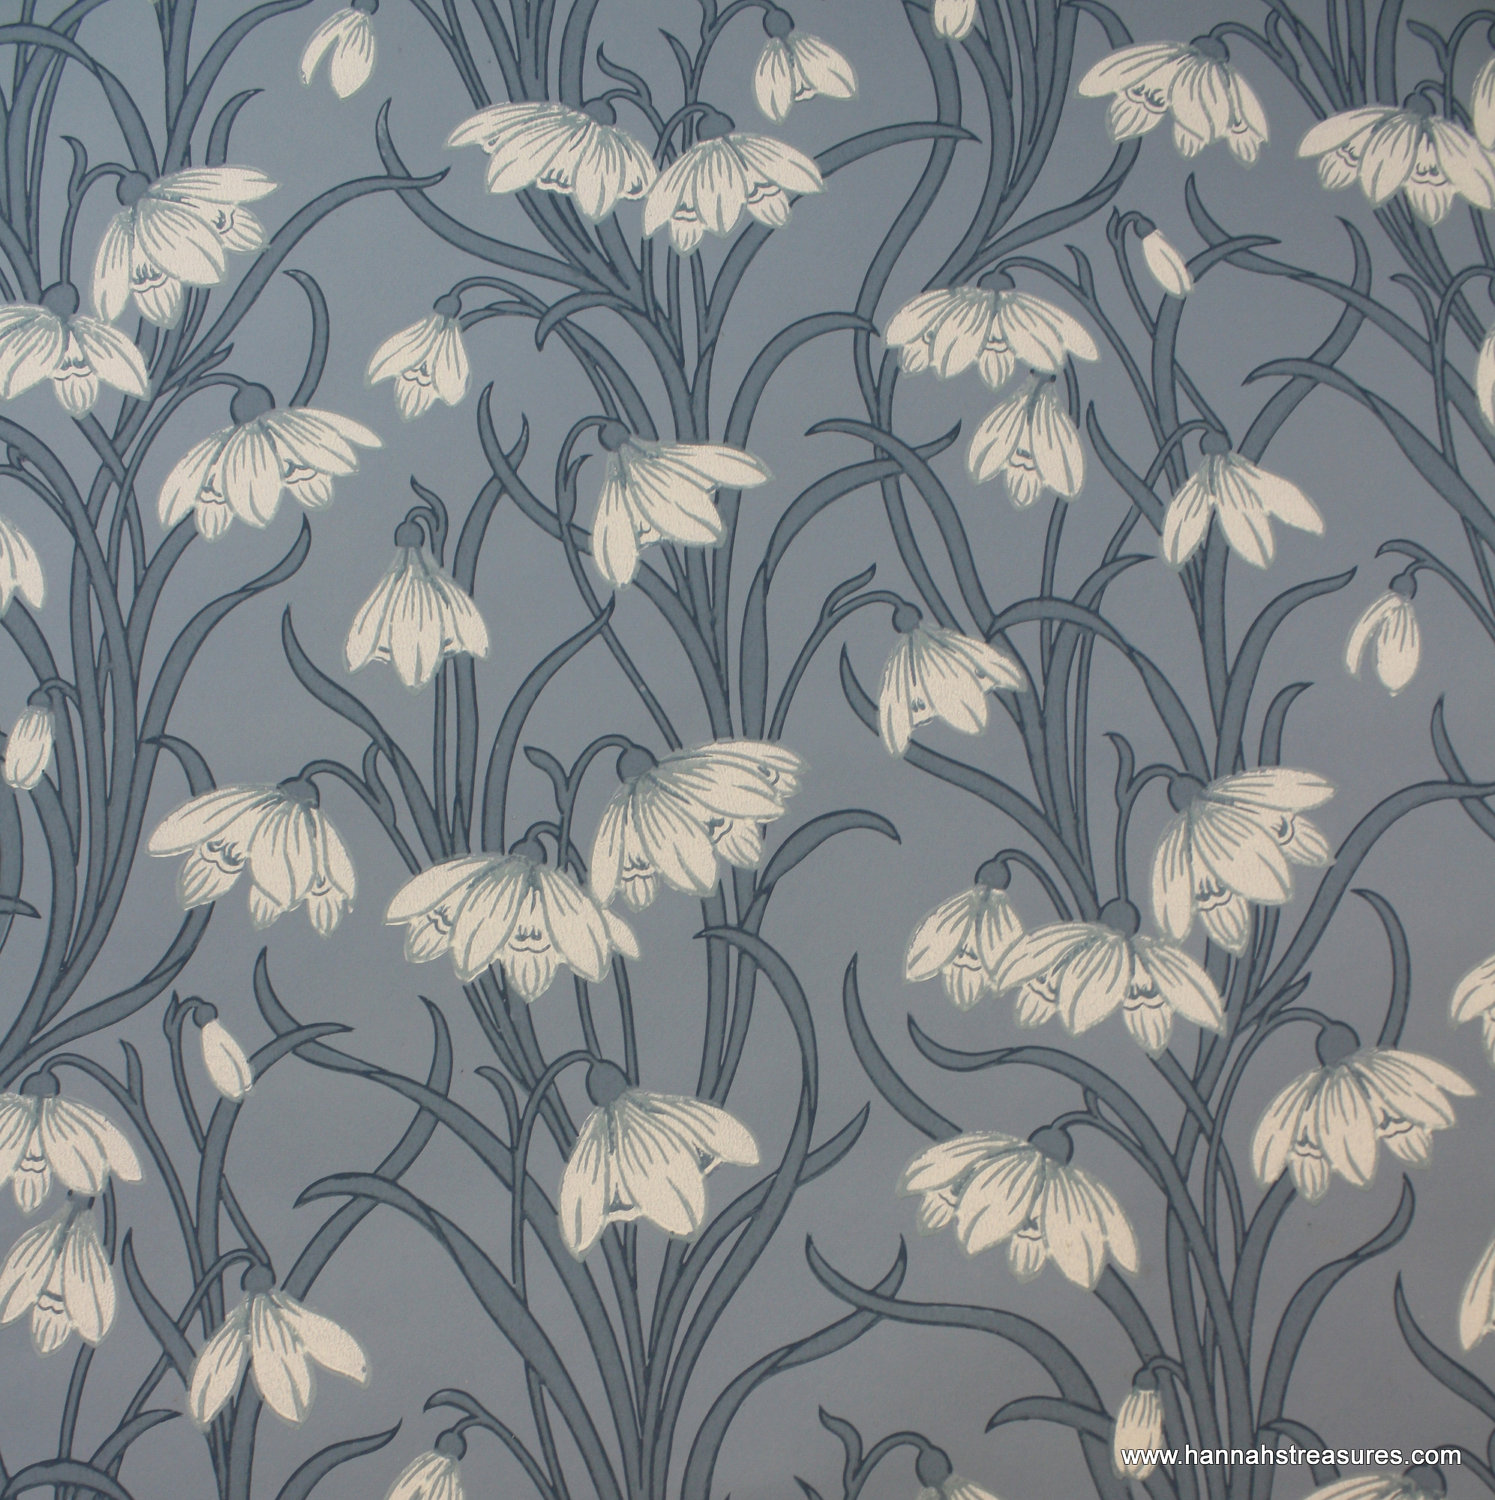 S Vintage Wallpaper Stunning White Floral By Hannahstreasures